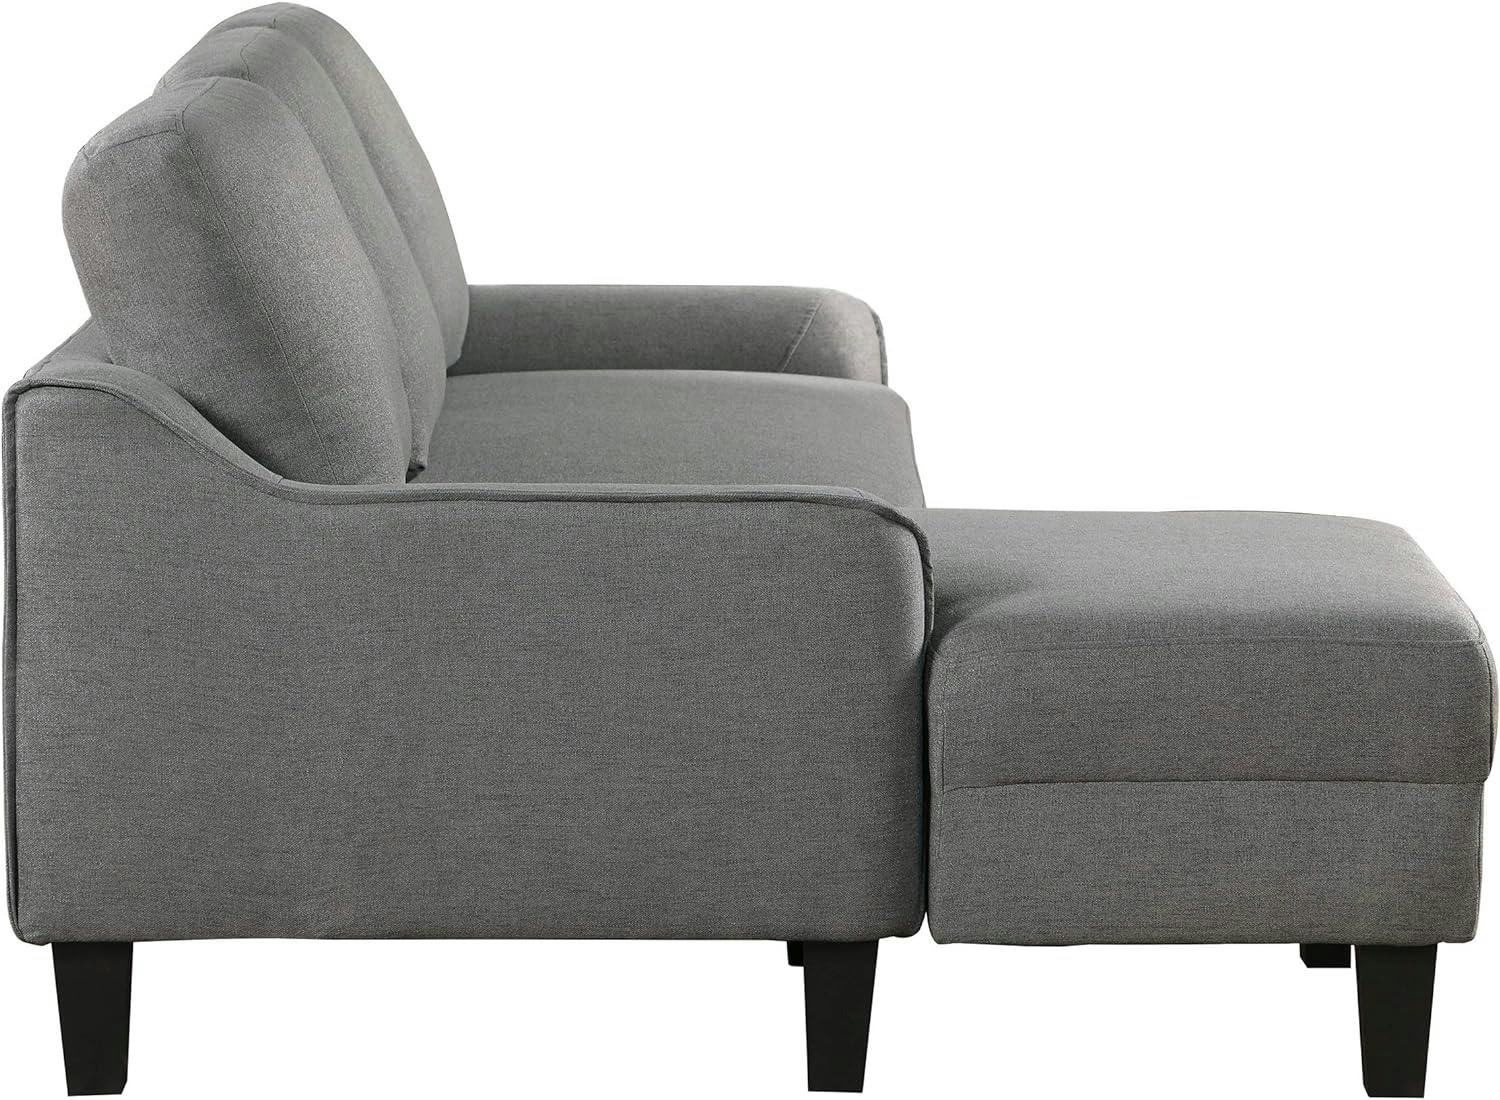 Twin Gray Fabric Sleeper Sectional with Metal Legs & Pillow-top Arm